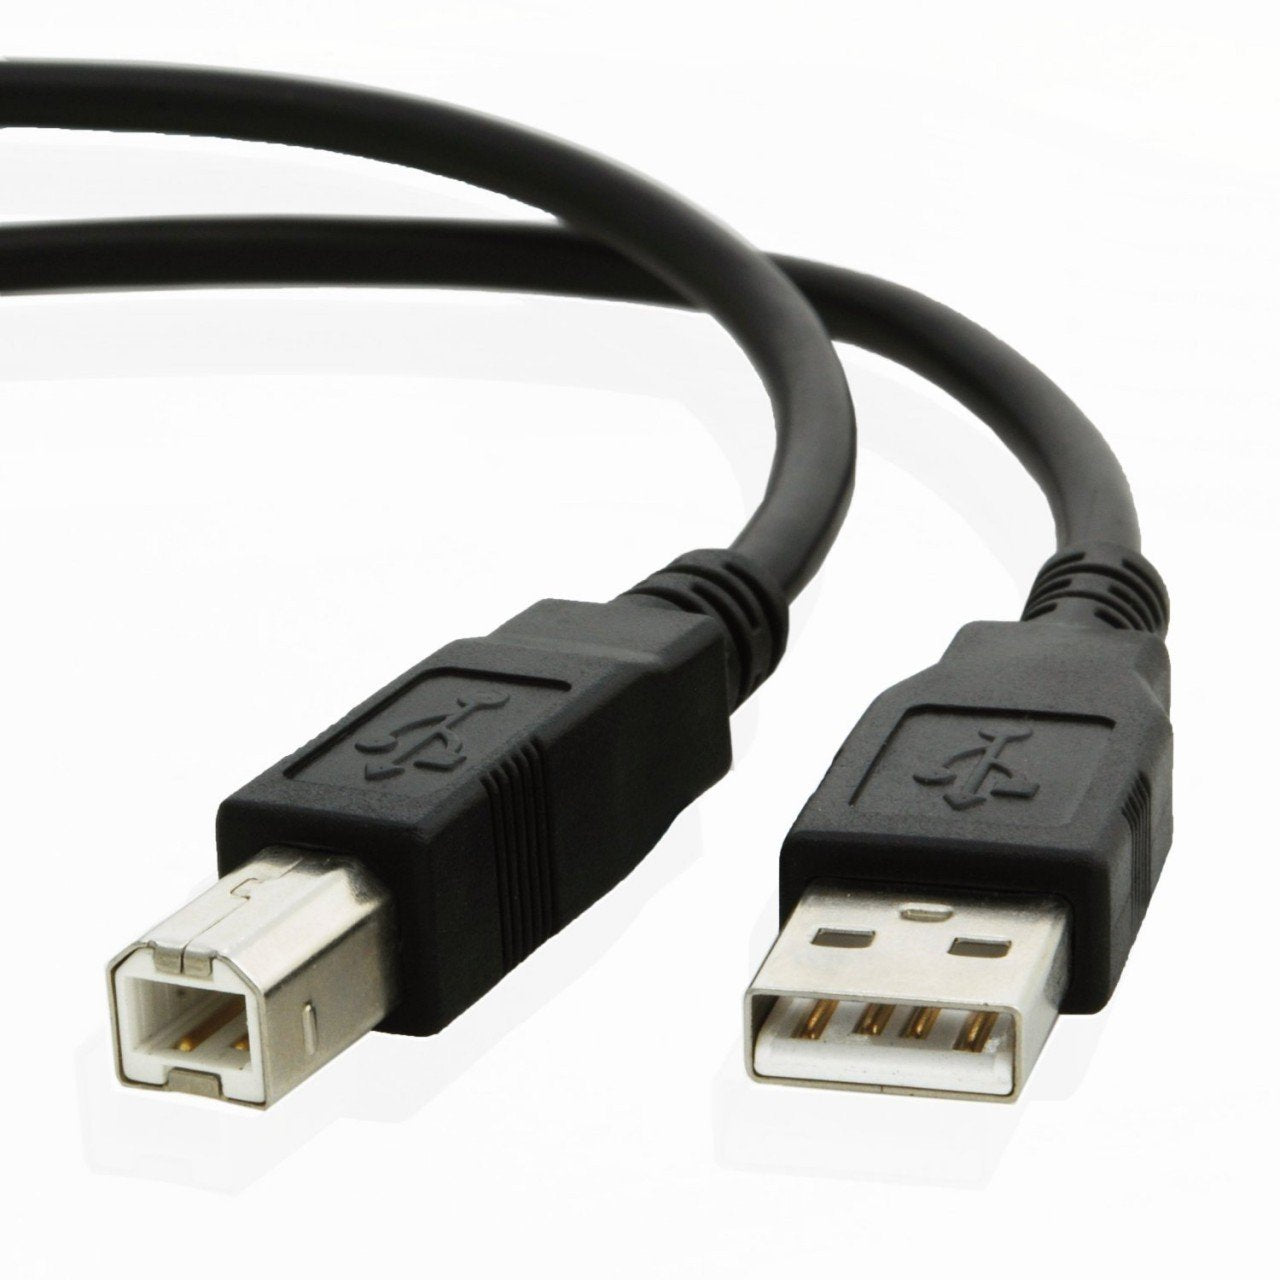 USB cable for Canon IMAGECLASS MF632cdw